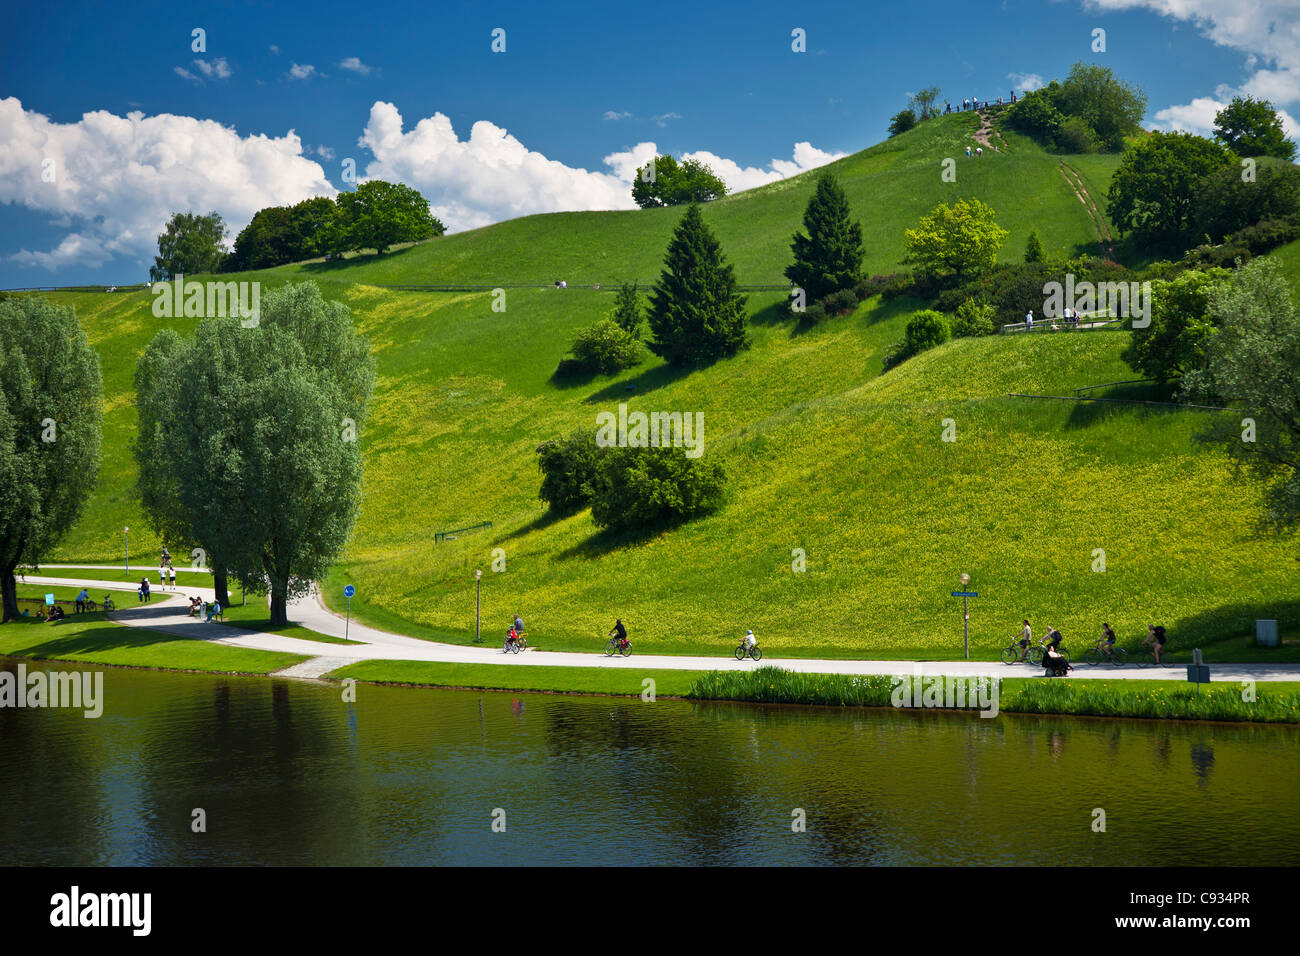 General view of the Munich Olympic Park looking across the lake towards the viewing platform, Gern, Munich, Bayern, Germany. Stock Photo